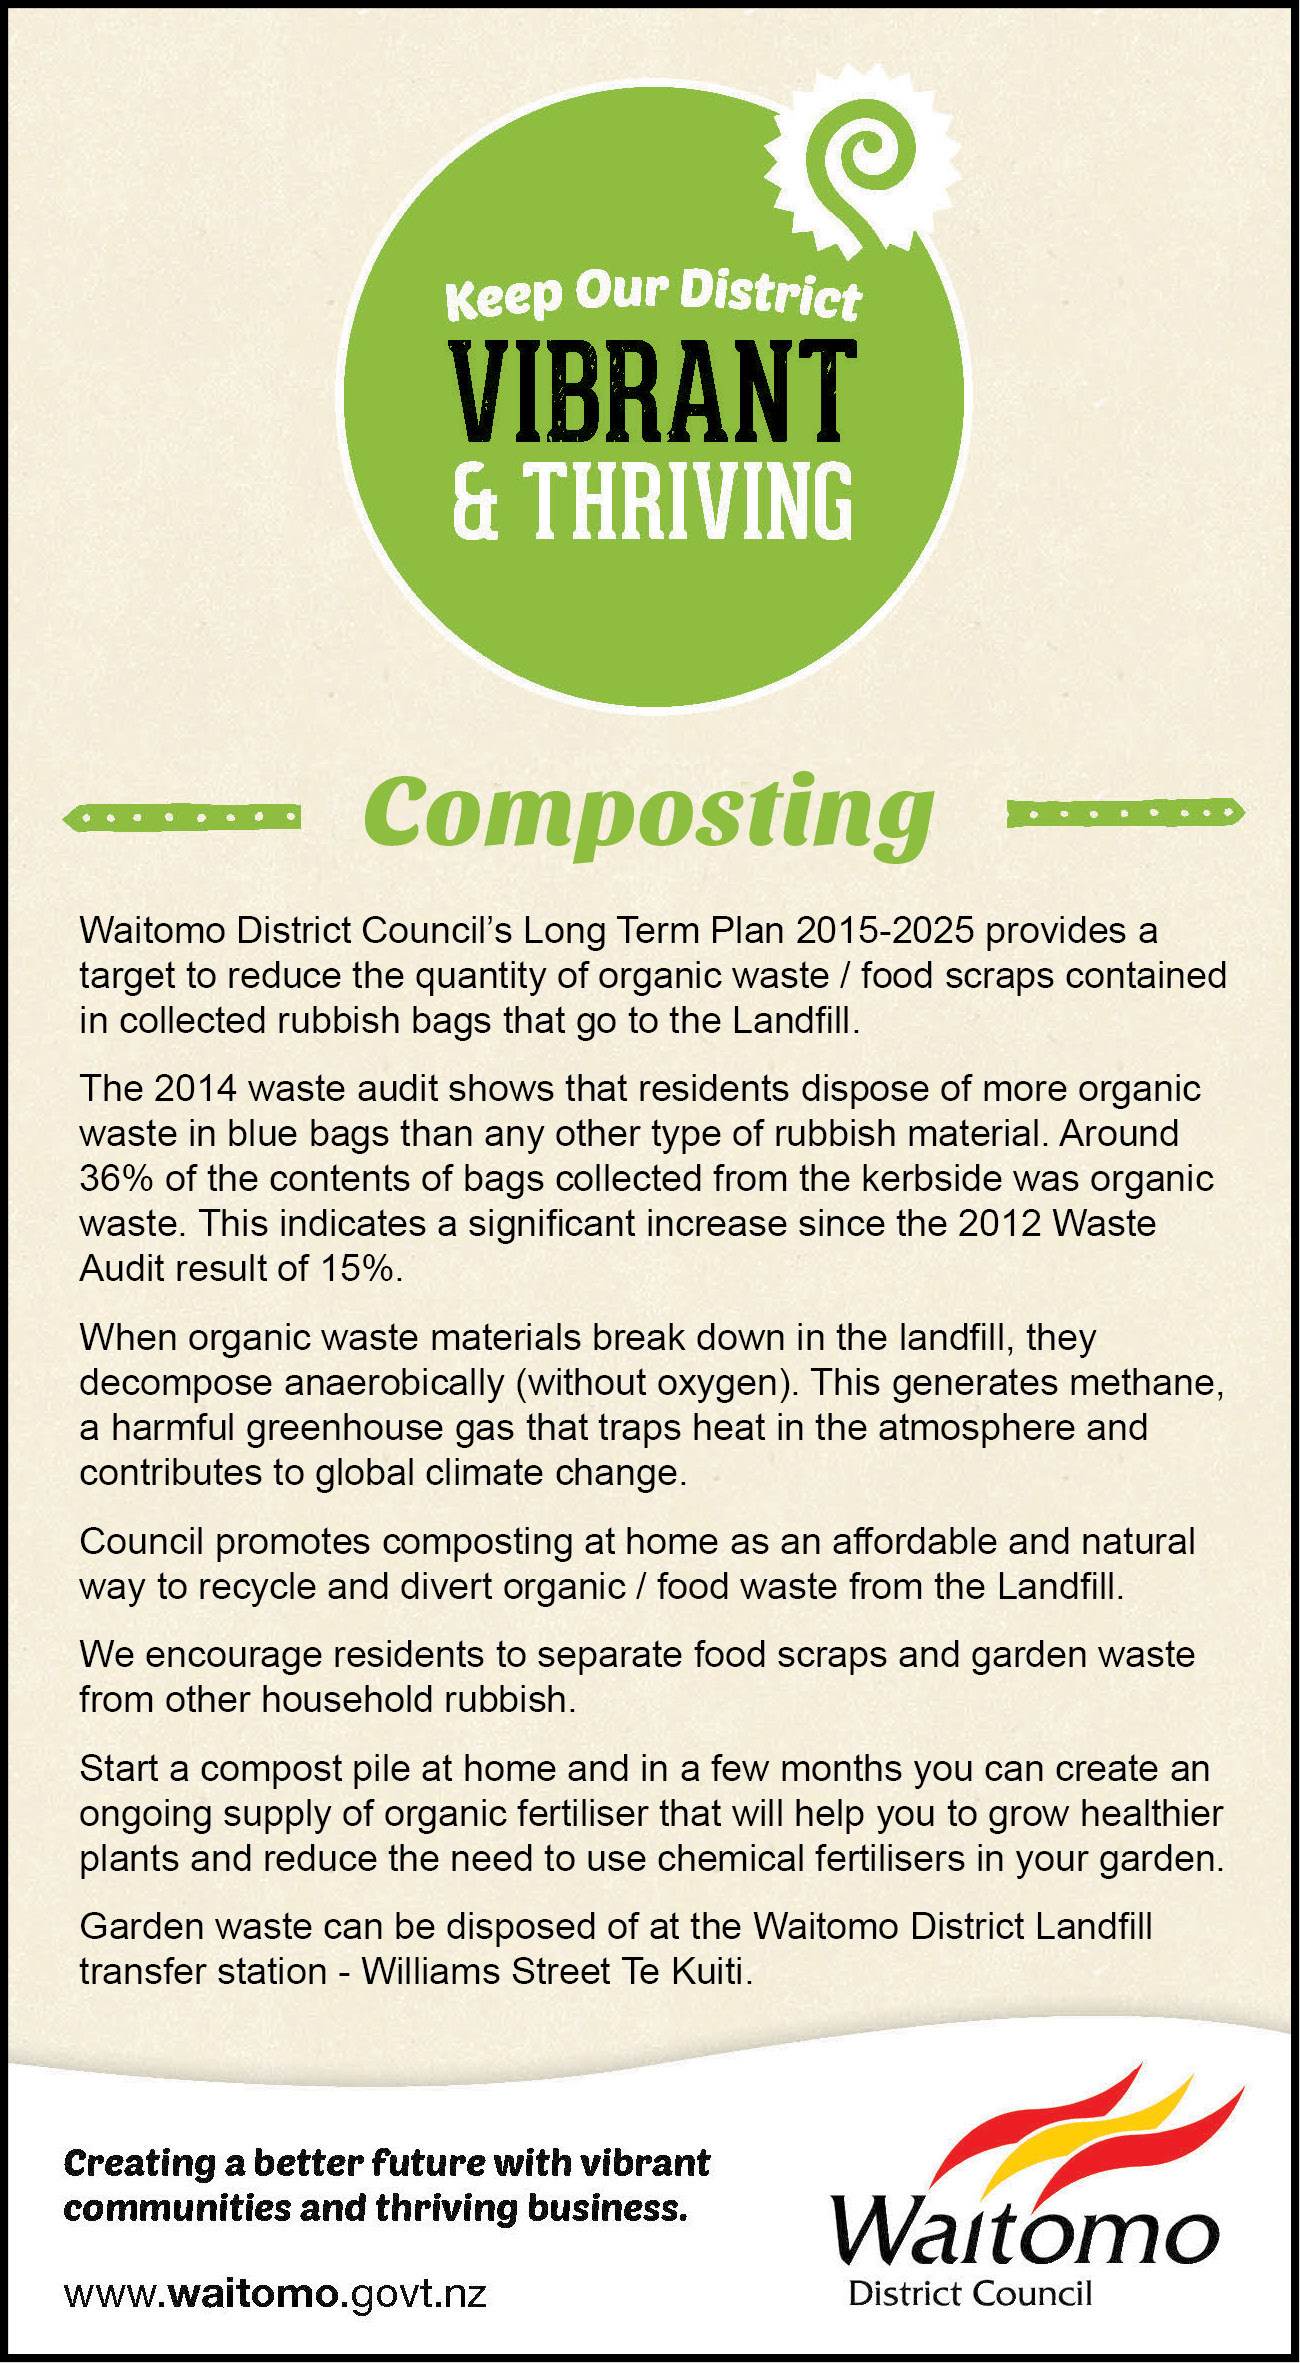 Keep our district vibrant and thriving composting at home